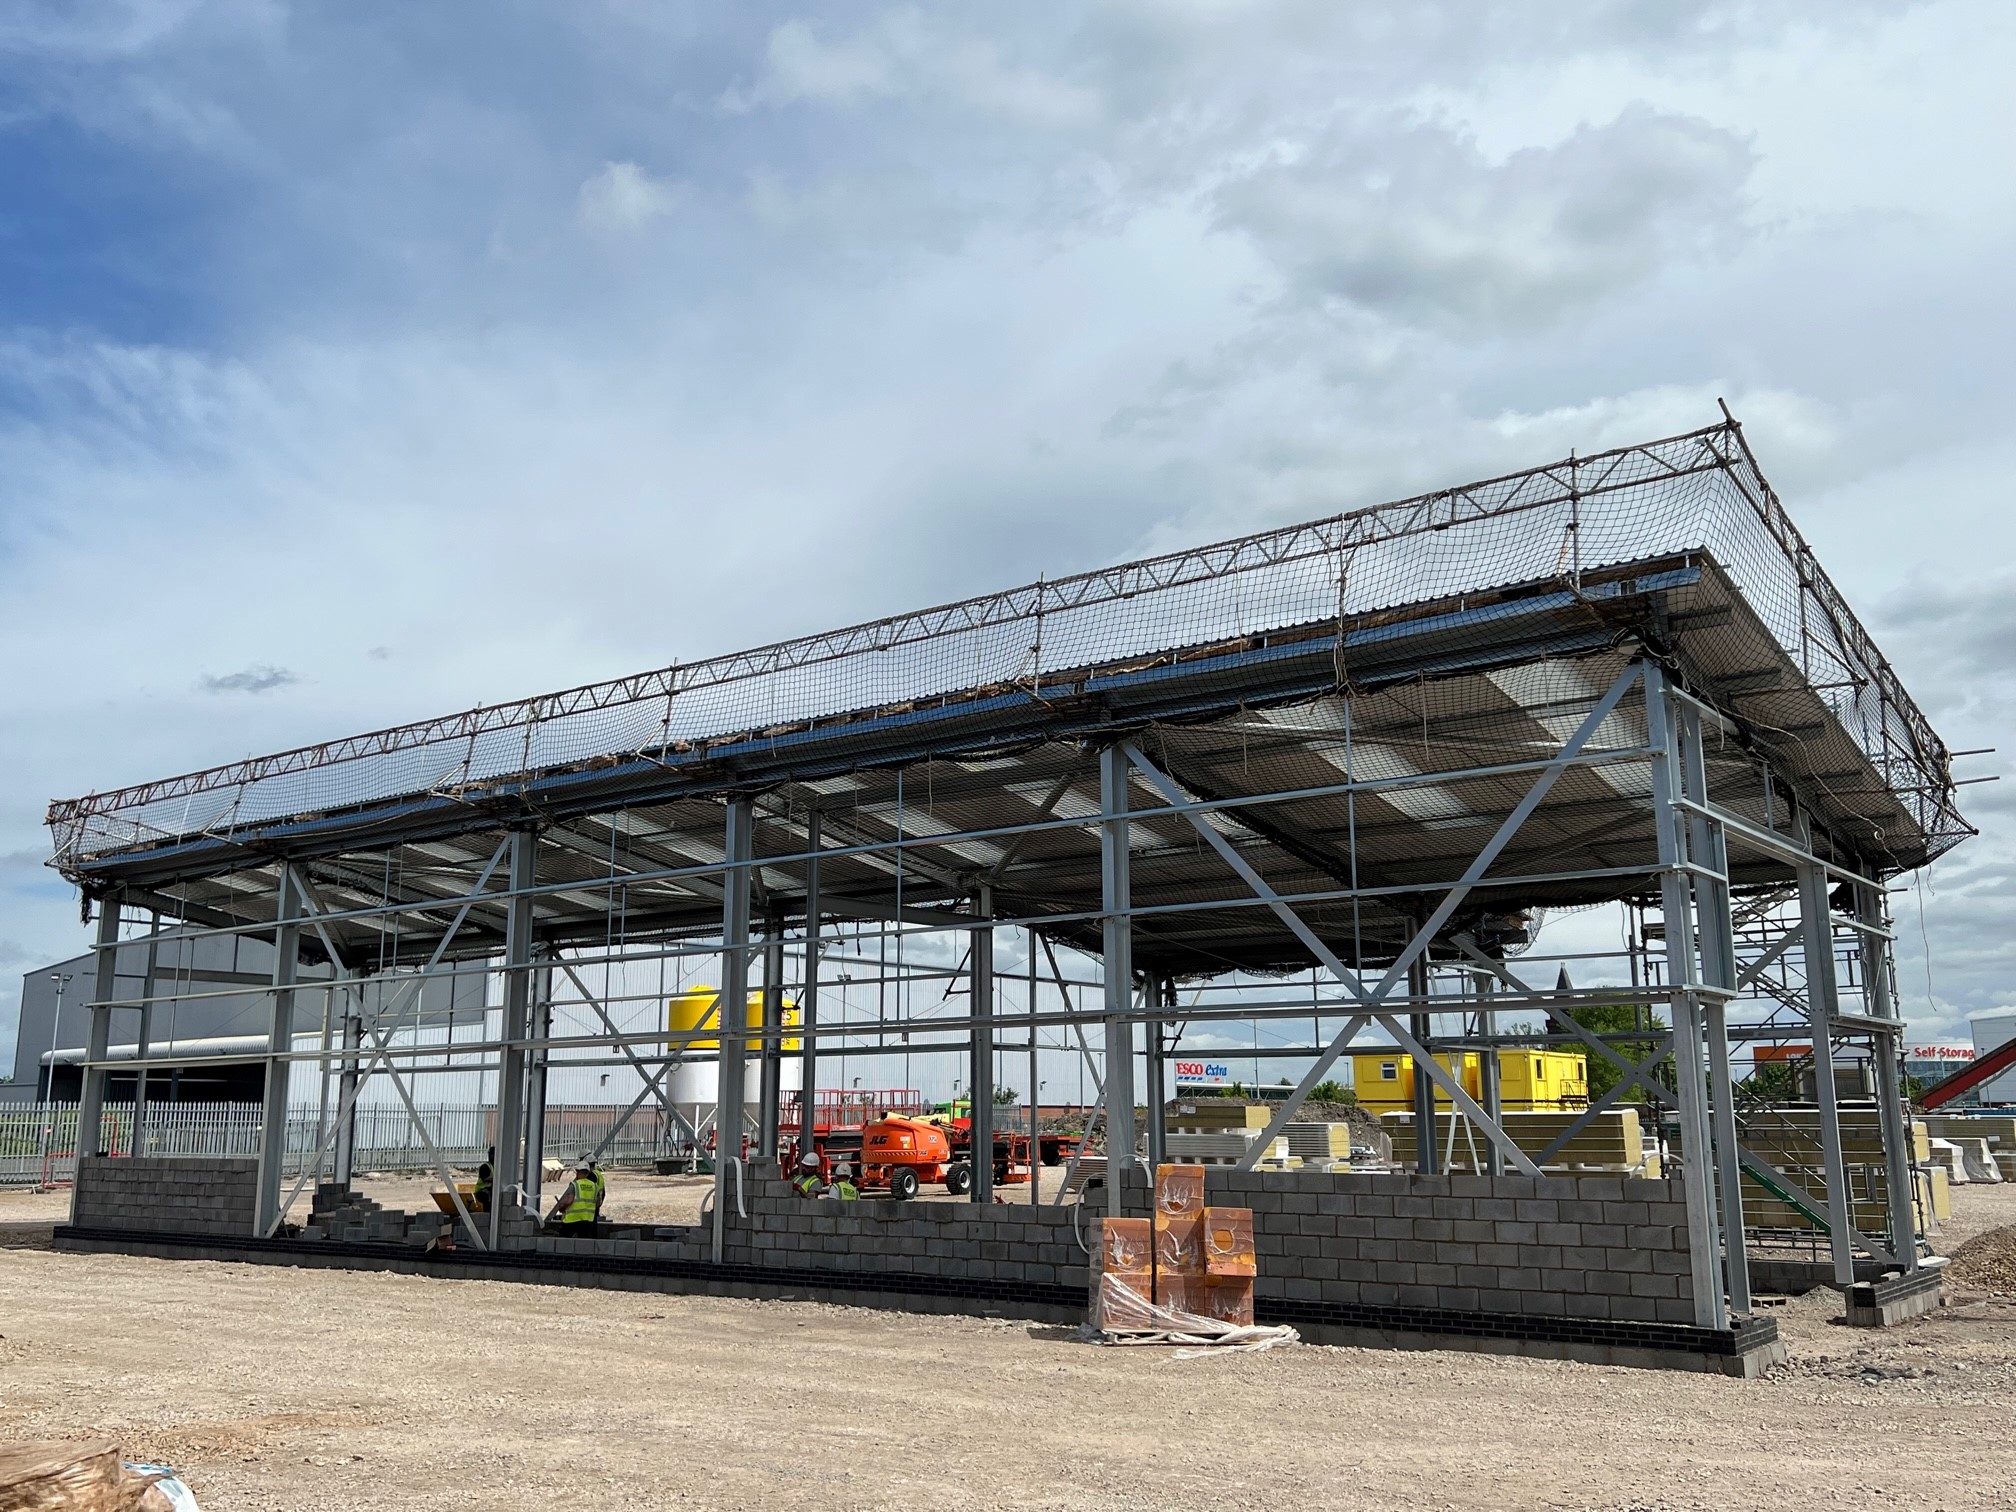 The electric bus depot structure, taken in May 2022